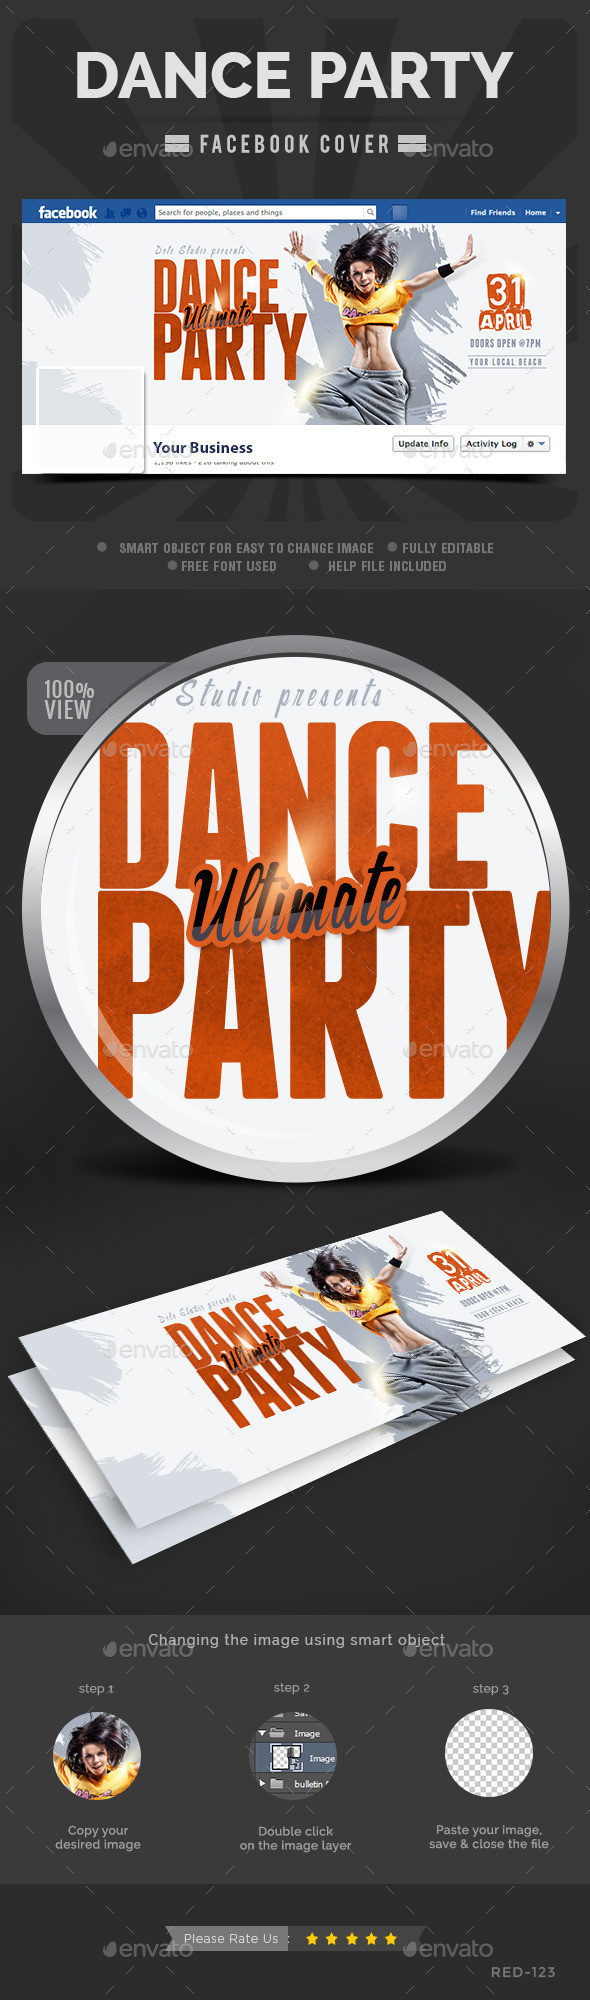 Red 123 dance 20party 20facebook 20cover preview